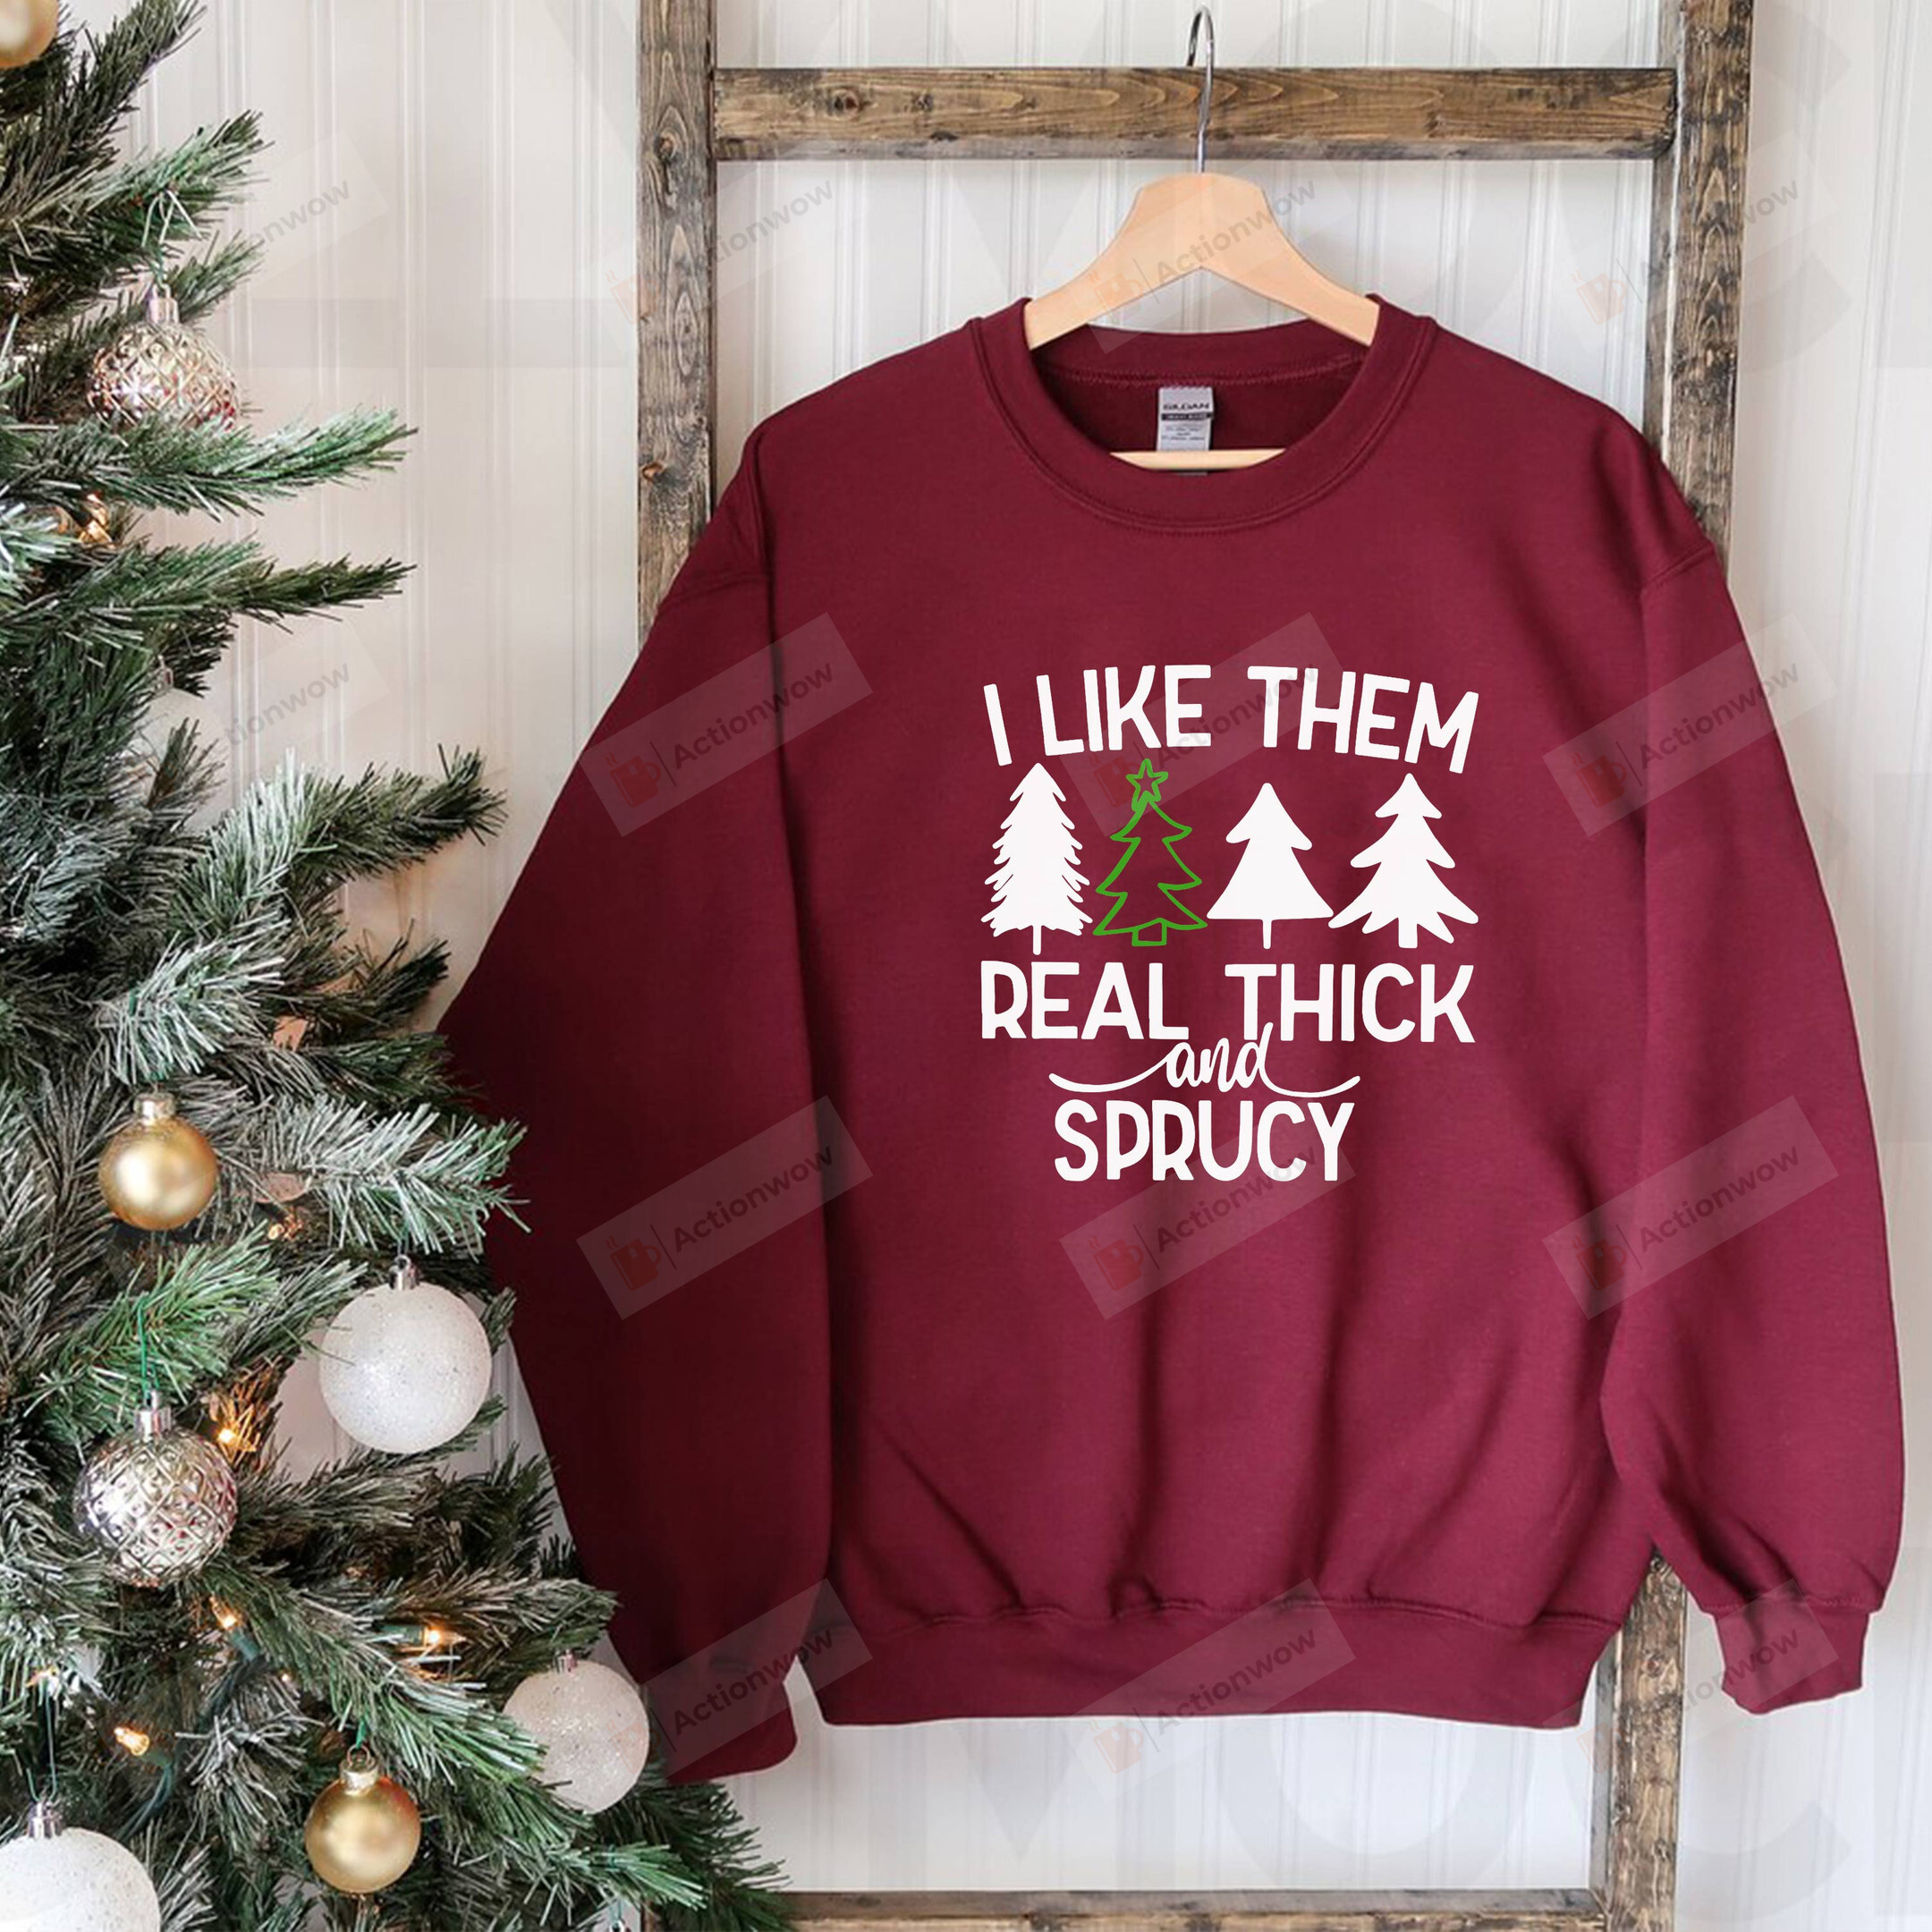 I Like Them Real Thick And Sprucy Sweatshirt, Christmas Sweatshirt, Christmas Gifts For Women